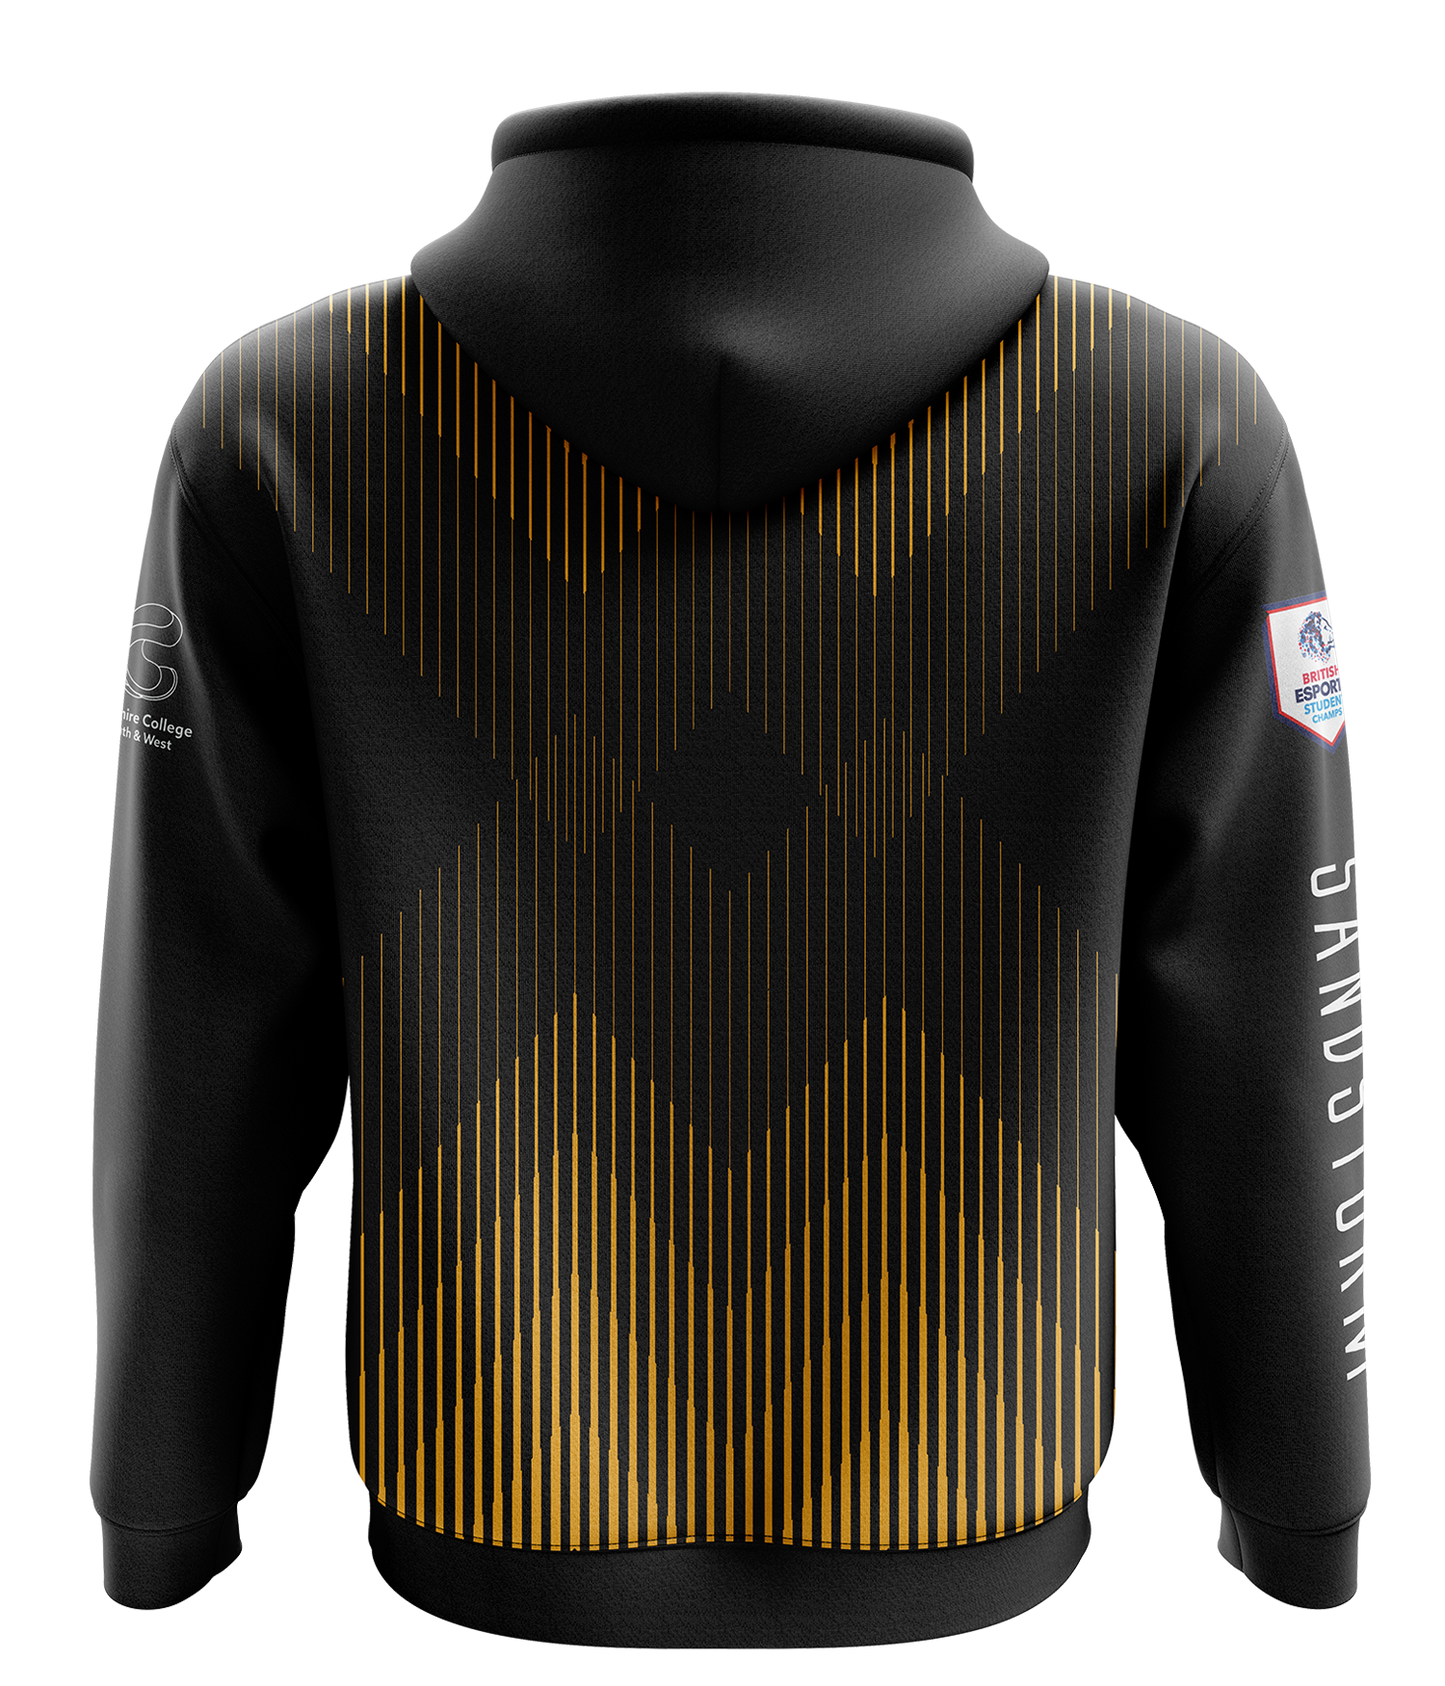 Cheshire Sandstorm Esports Hoodie - with Gamertag